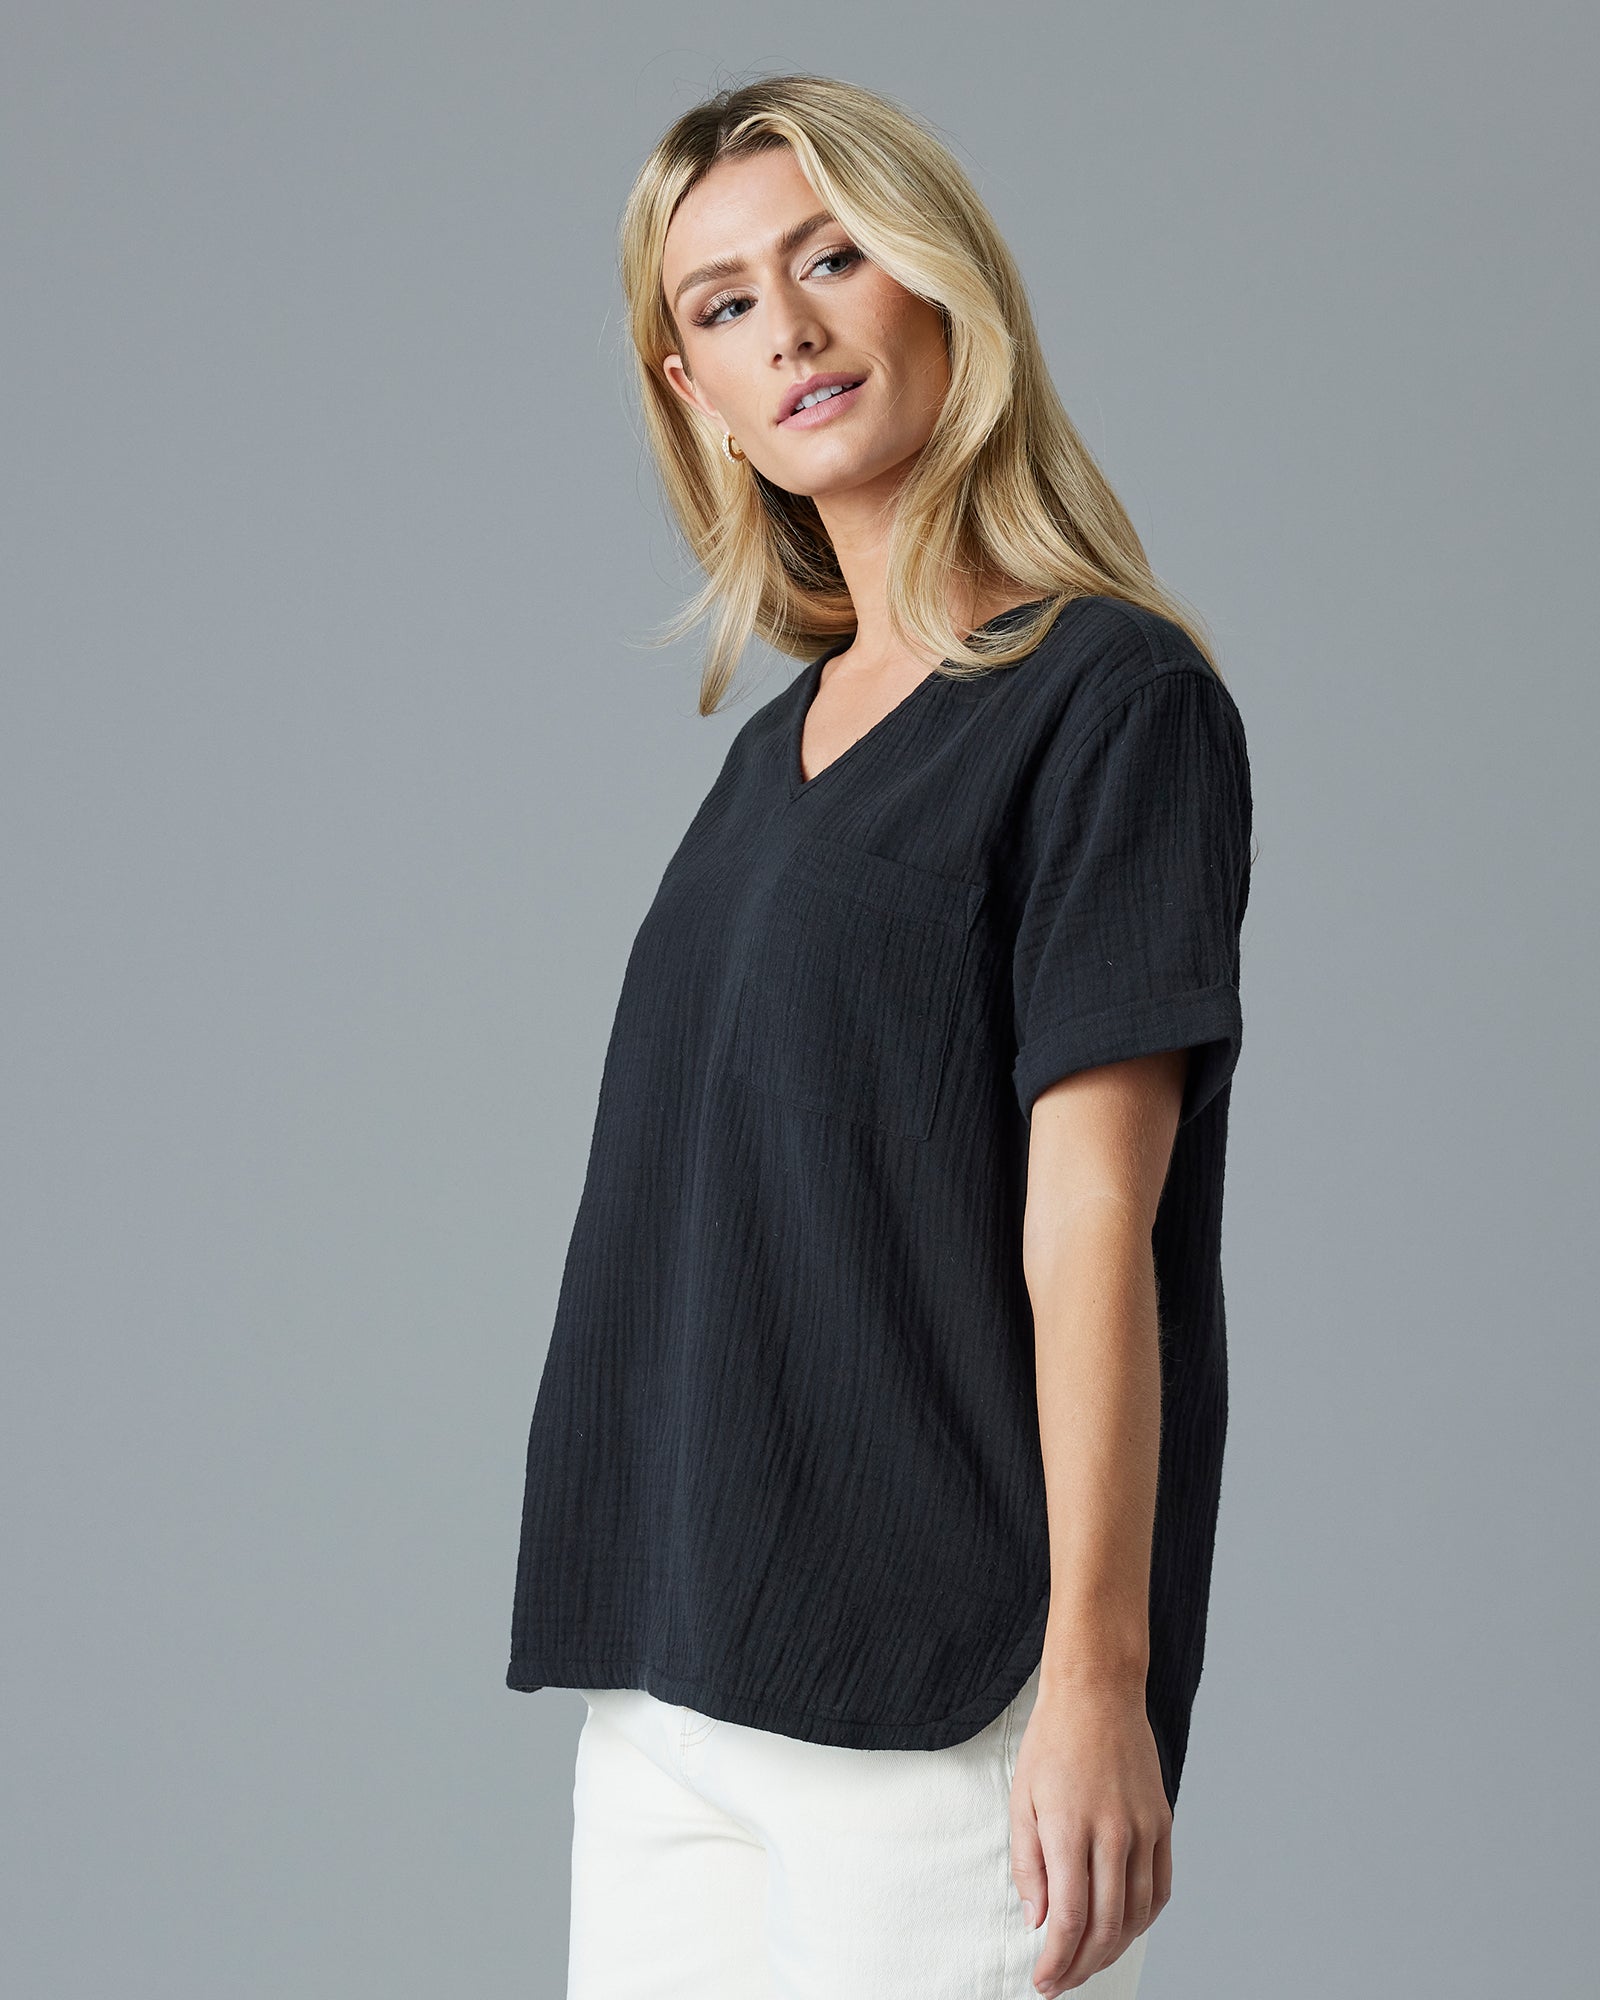 Woman in a black, short sleeved, textured top